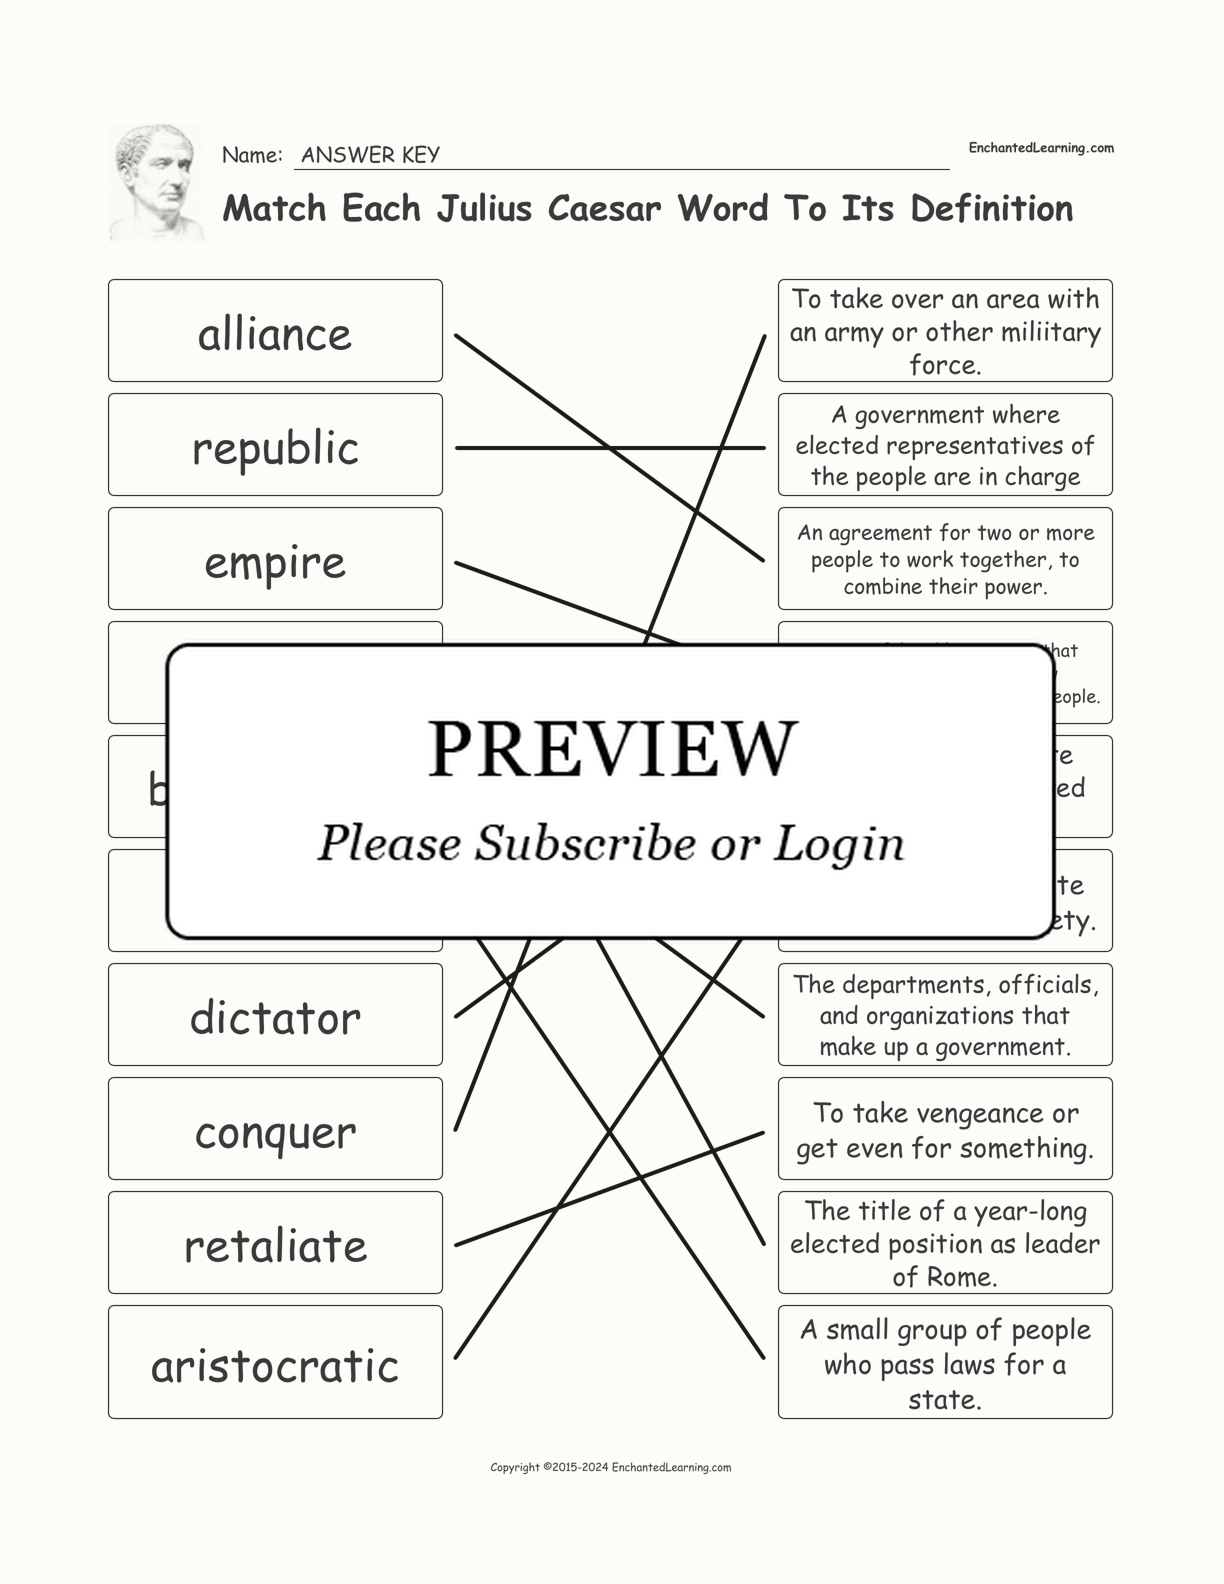 Match Each Julius Caesar-Related Word to its Definition interactive worksheet page 2